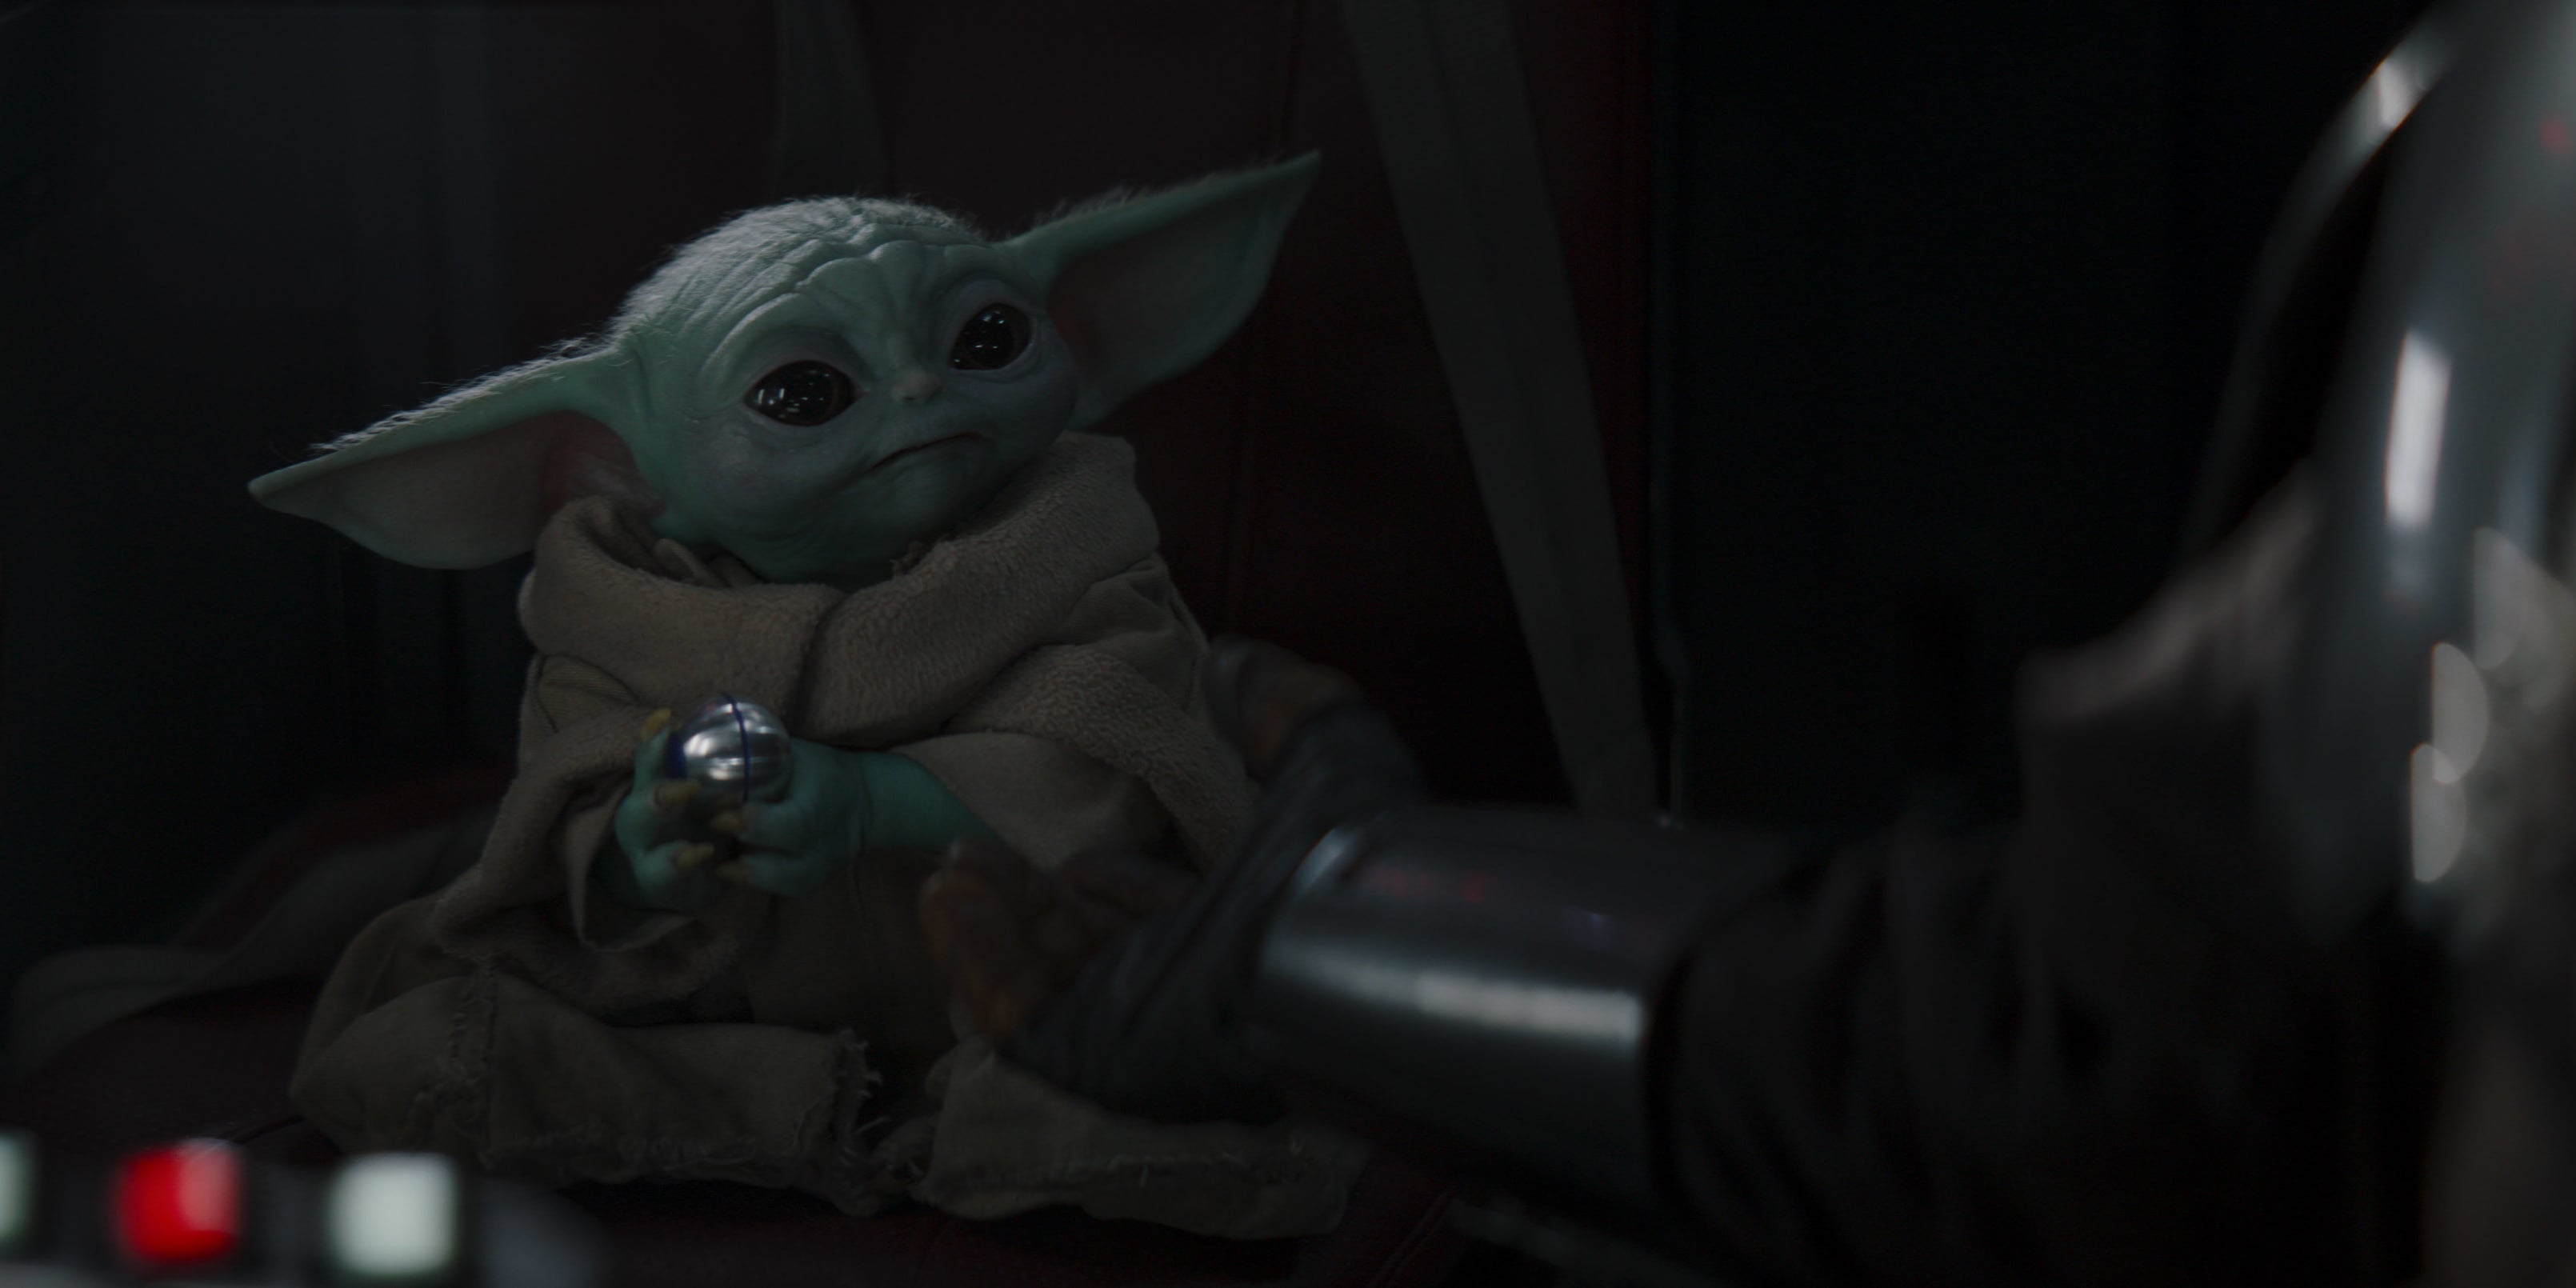 Is Grogu Related to Yoda? 'The Mandalorian' lore, Explained